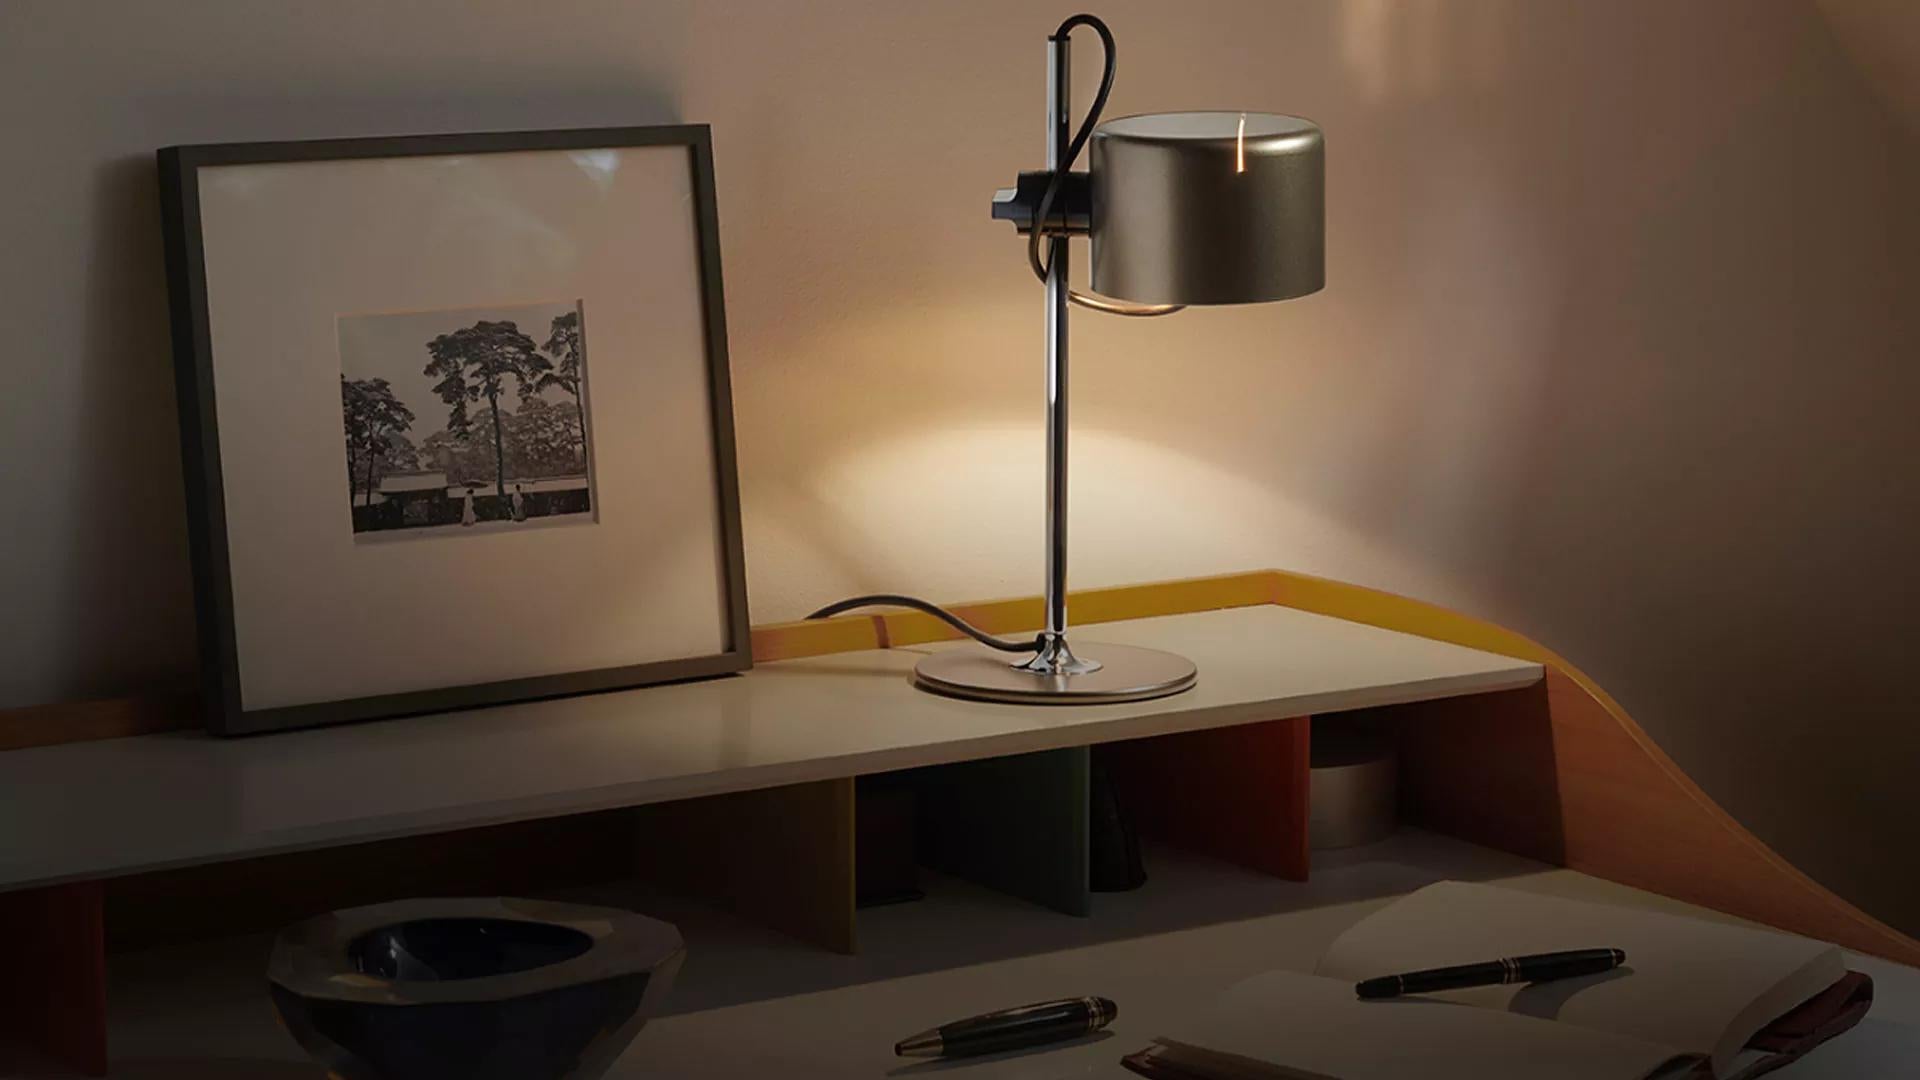 Joe Colombo Model #2201 'Mini Coupé' table lamp in anodic bronze for Oluce. 

Executed in anodic bronze and chrome, this table lamp is a smaller-scale version of one of the most refined Minimalist Italian designs of the midcentury and an icon for